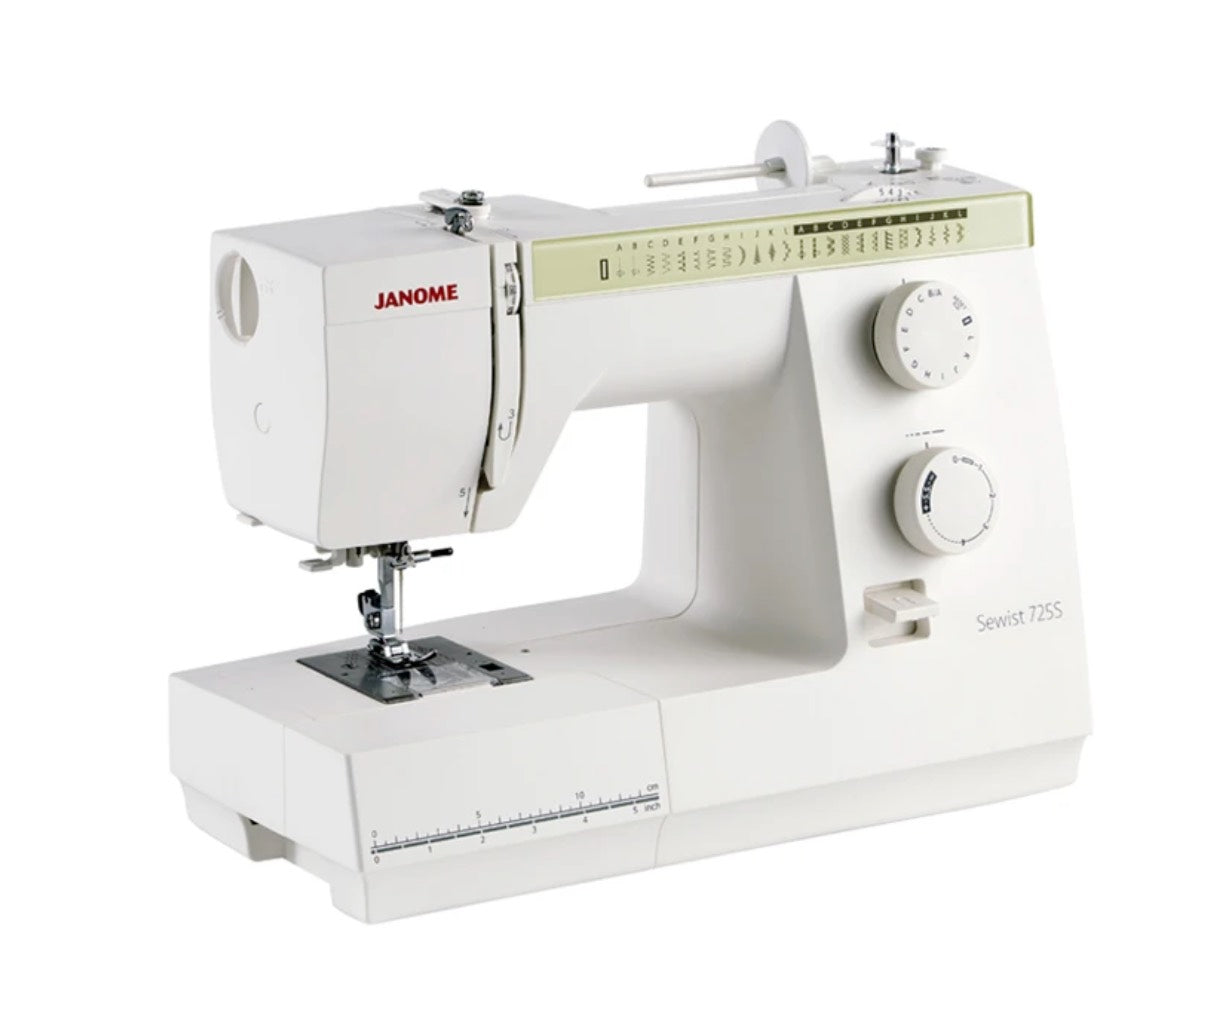 Angled view of the Janome Sewist 725S sewing machine, highlighting the stitch guide, selection dials, and the machine's sleek, modern design.